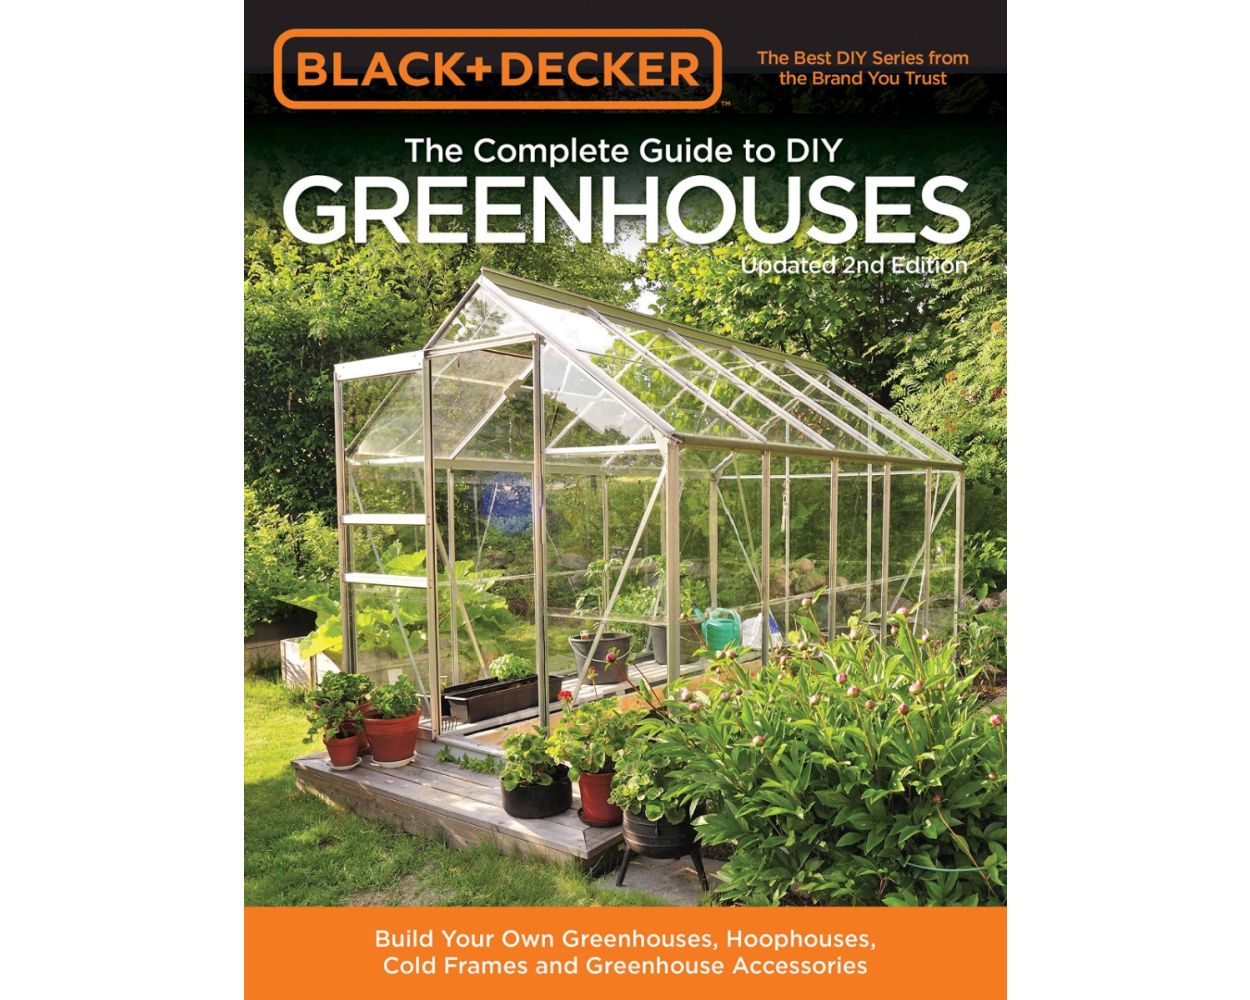 The Complete Guide to Sheds Updated 4th Edition: Design and Build a Shed:  Complete Plans, Step-by-Step How-To (Black & Decker) (Paperback)